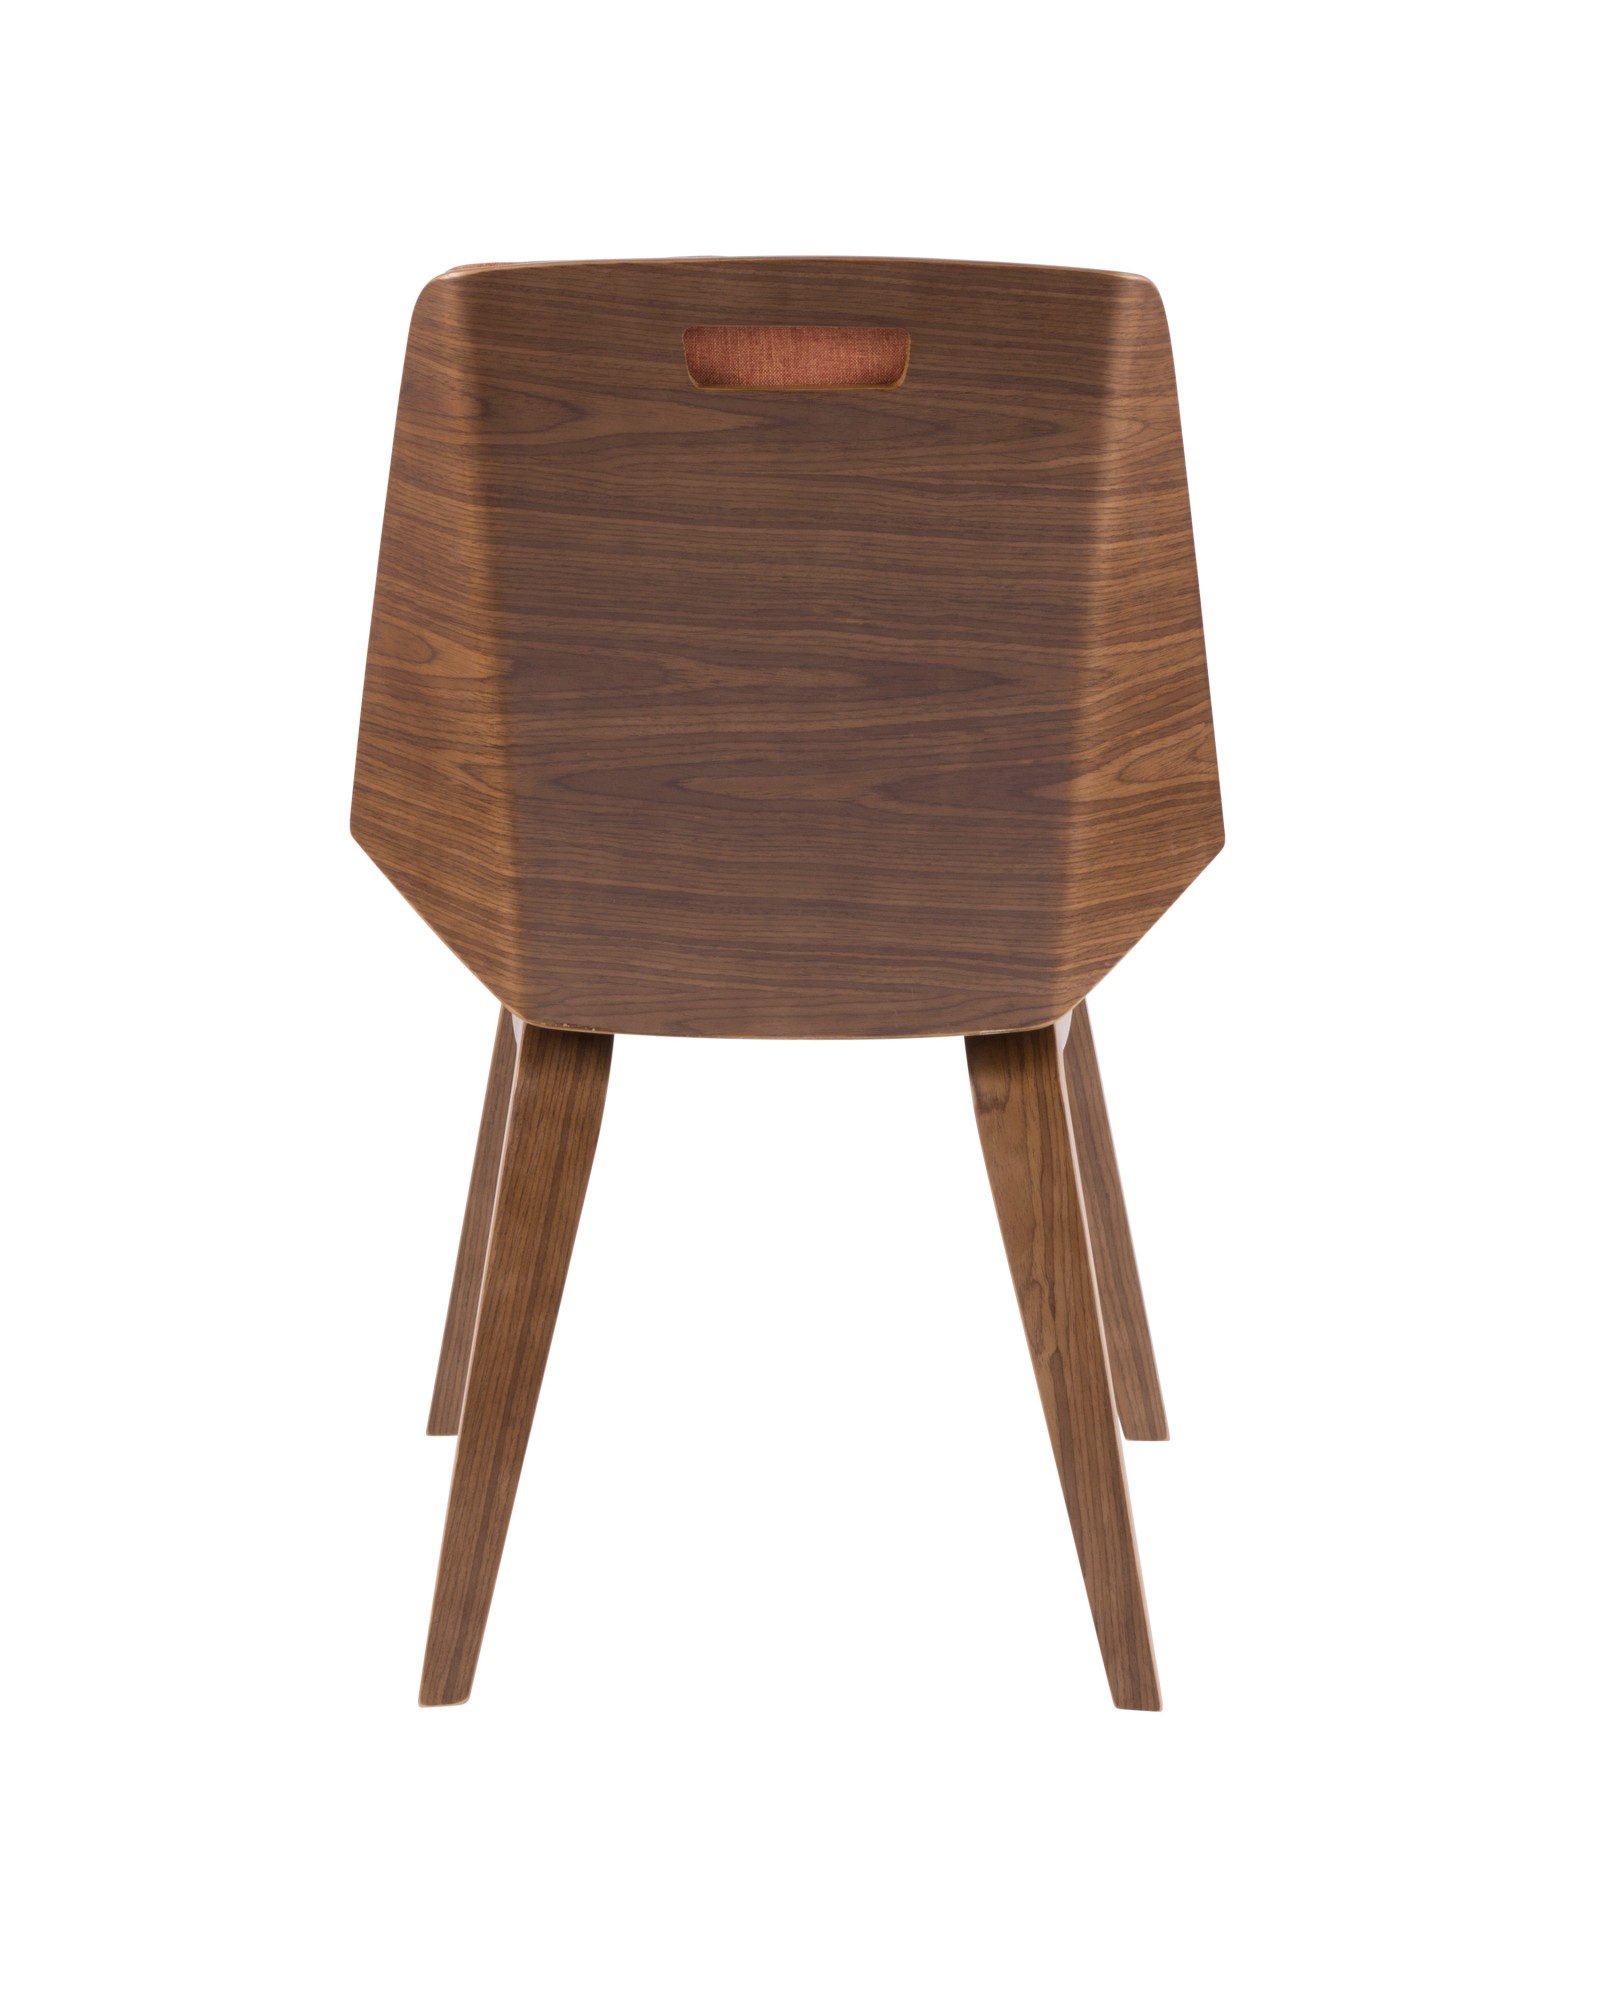 Corazza Mid-century Modern Dining/Accent Chair in Walnut and Orange